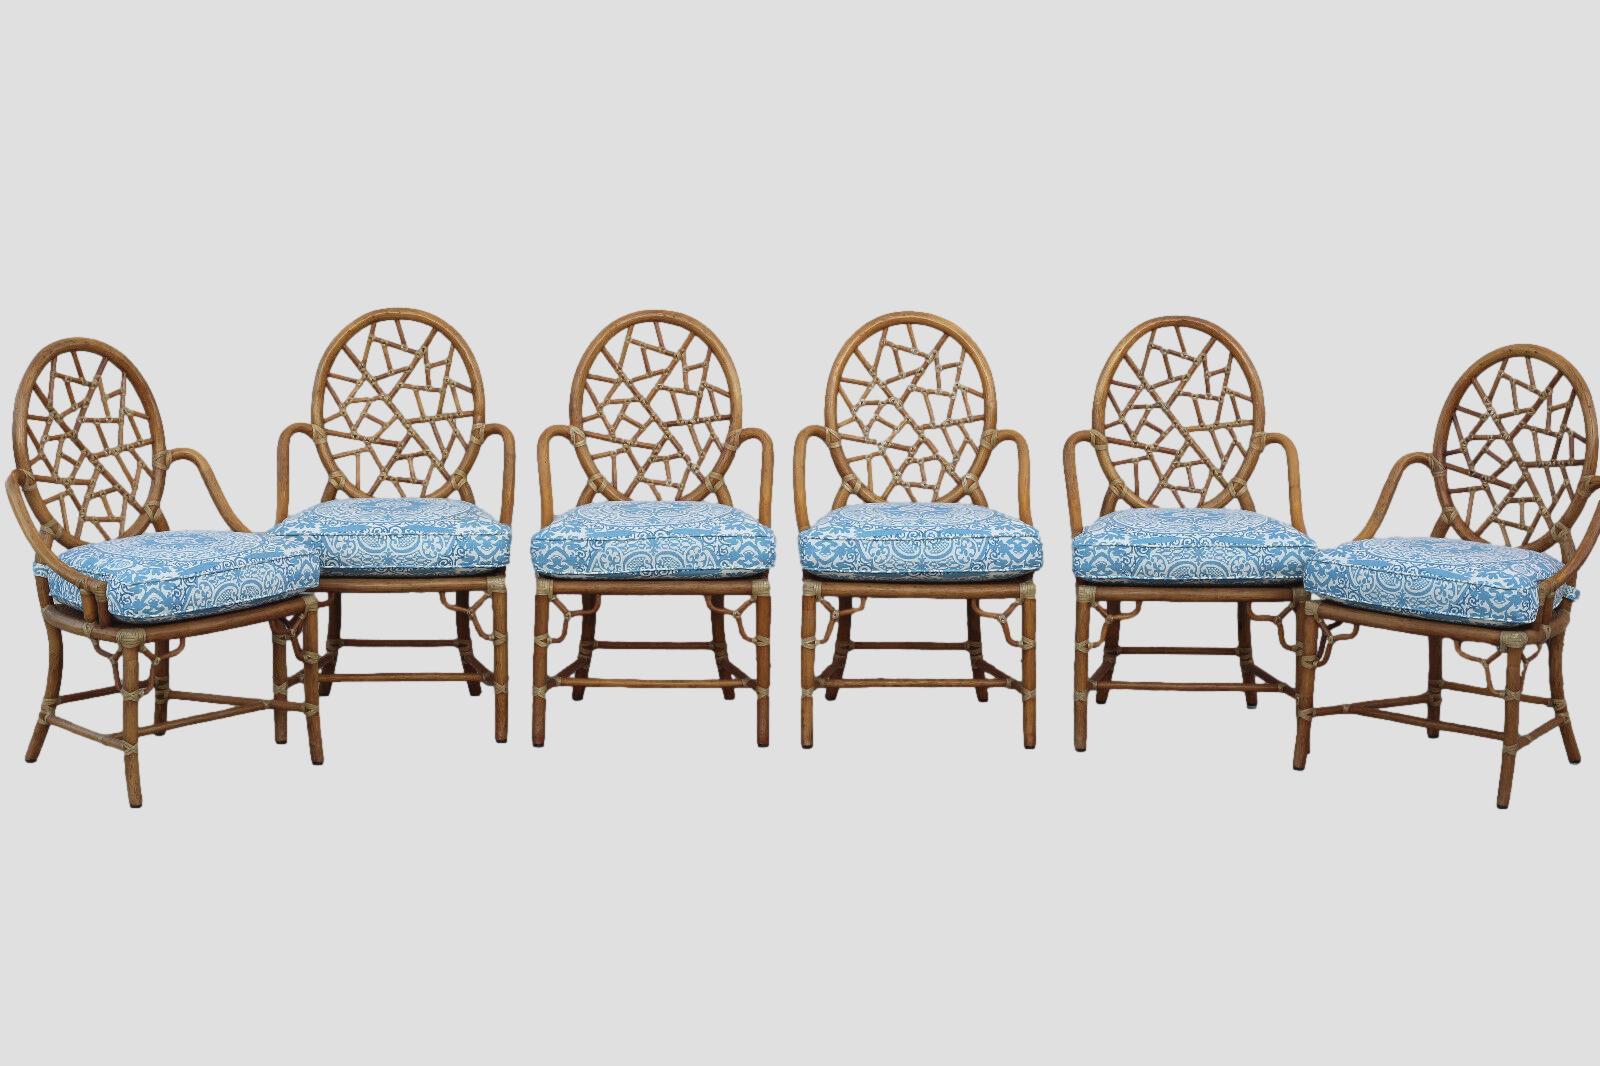 American Elinor McGuire Iconic Cracked Ice Dining Chairs, a Set of 6, with McGuire Label